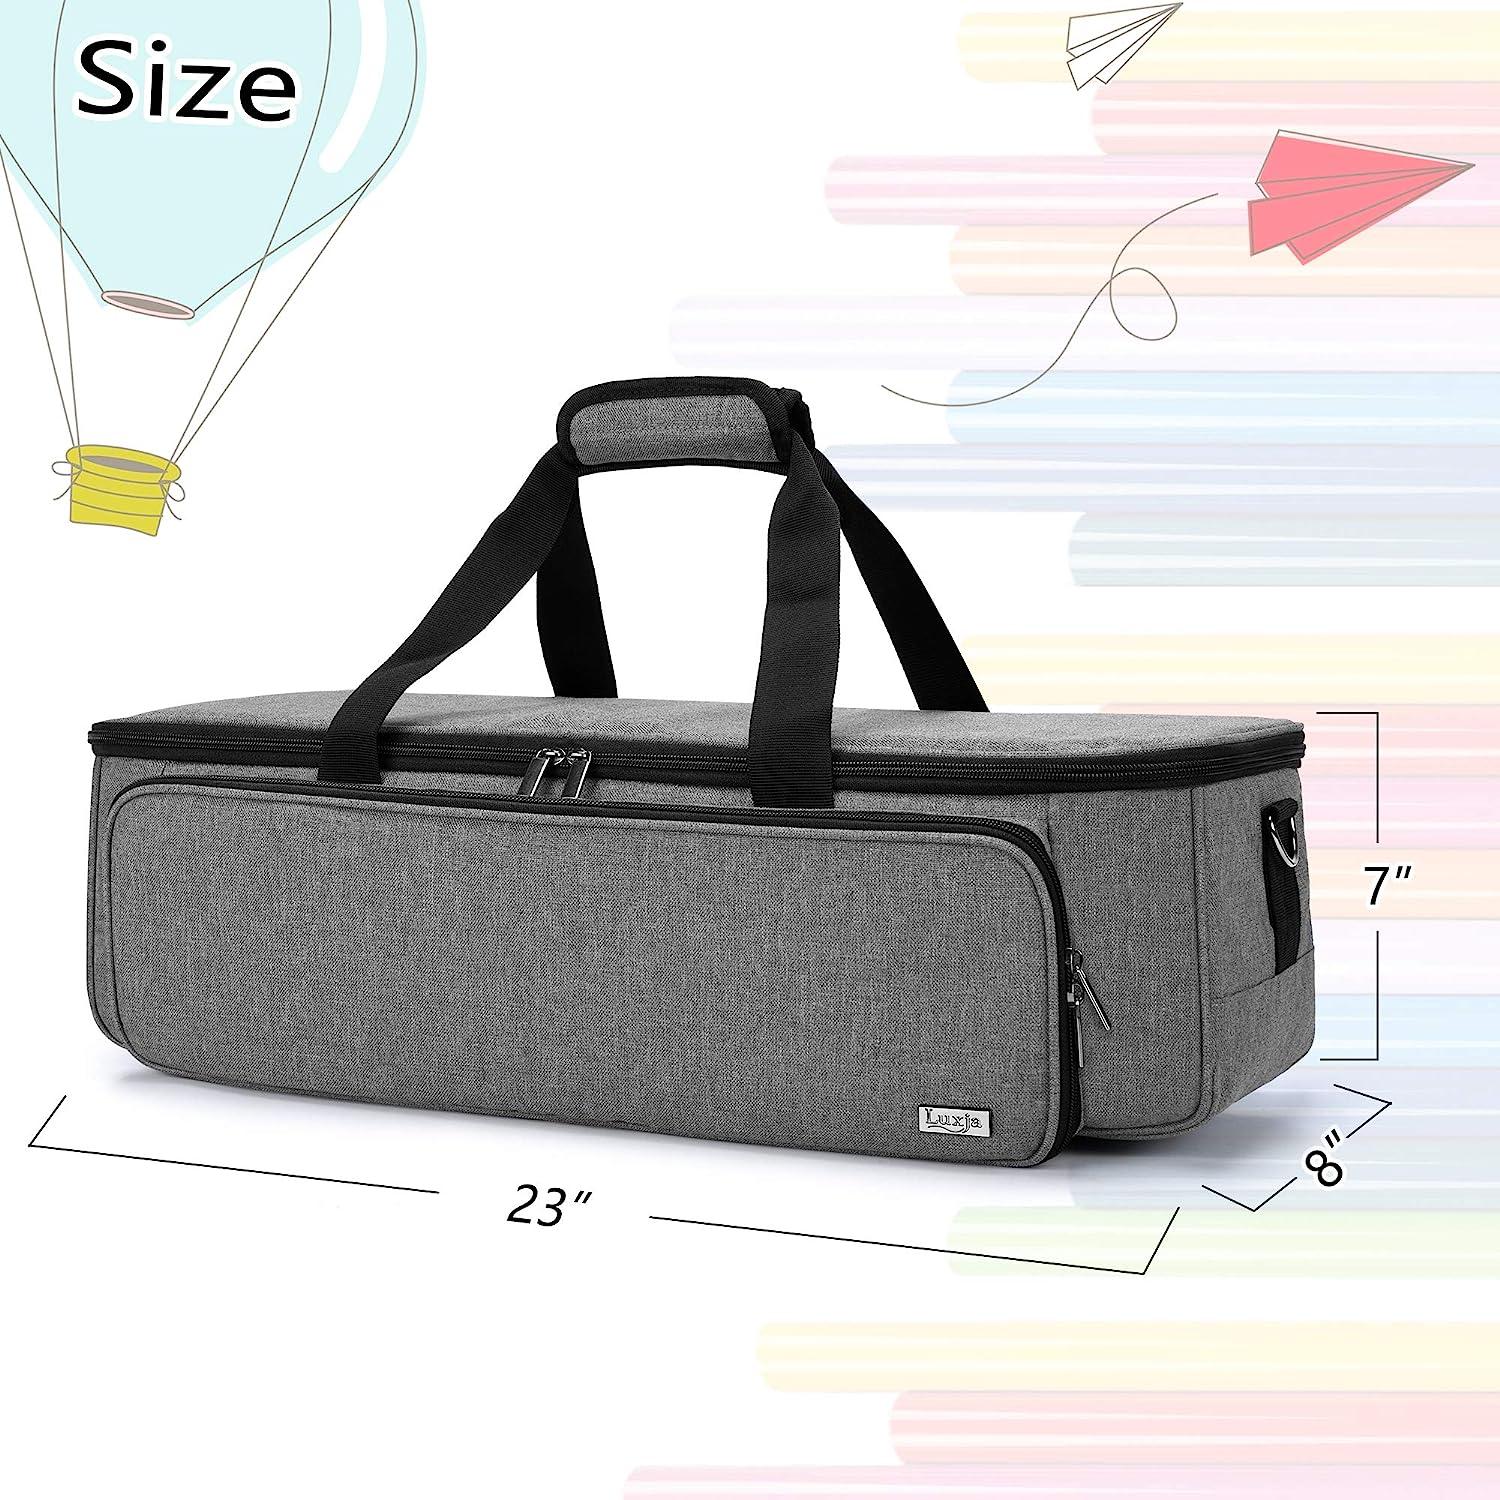  LUXJA Carrying Bag Compatible with Cricut Explore Air and  Maker, Tote Bag Compatible with Cricut Explore Air, Silhouette Cameo 4 and  Supplies (Bag Only, Patent Design), Gray